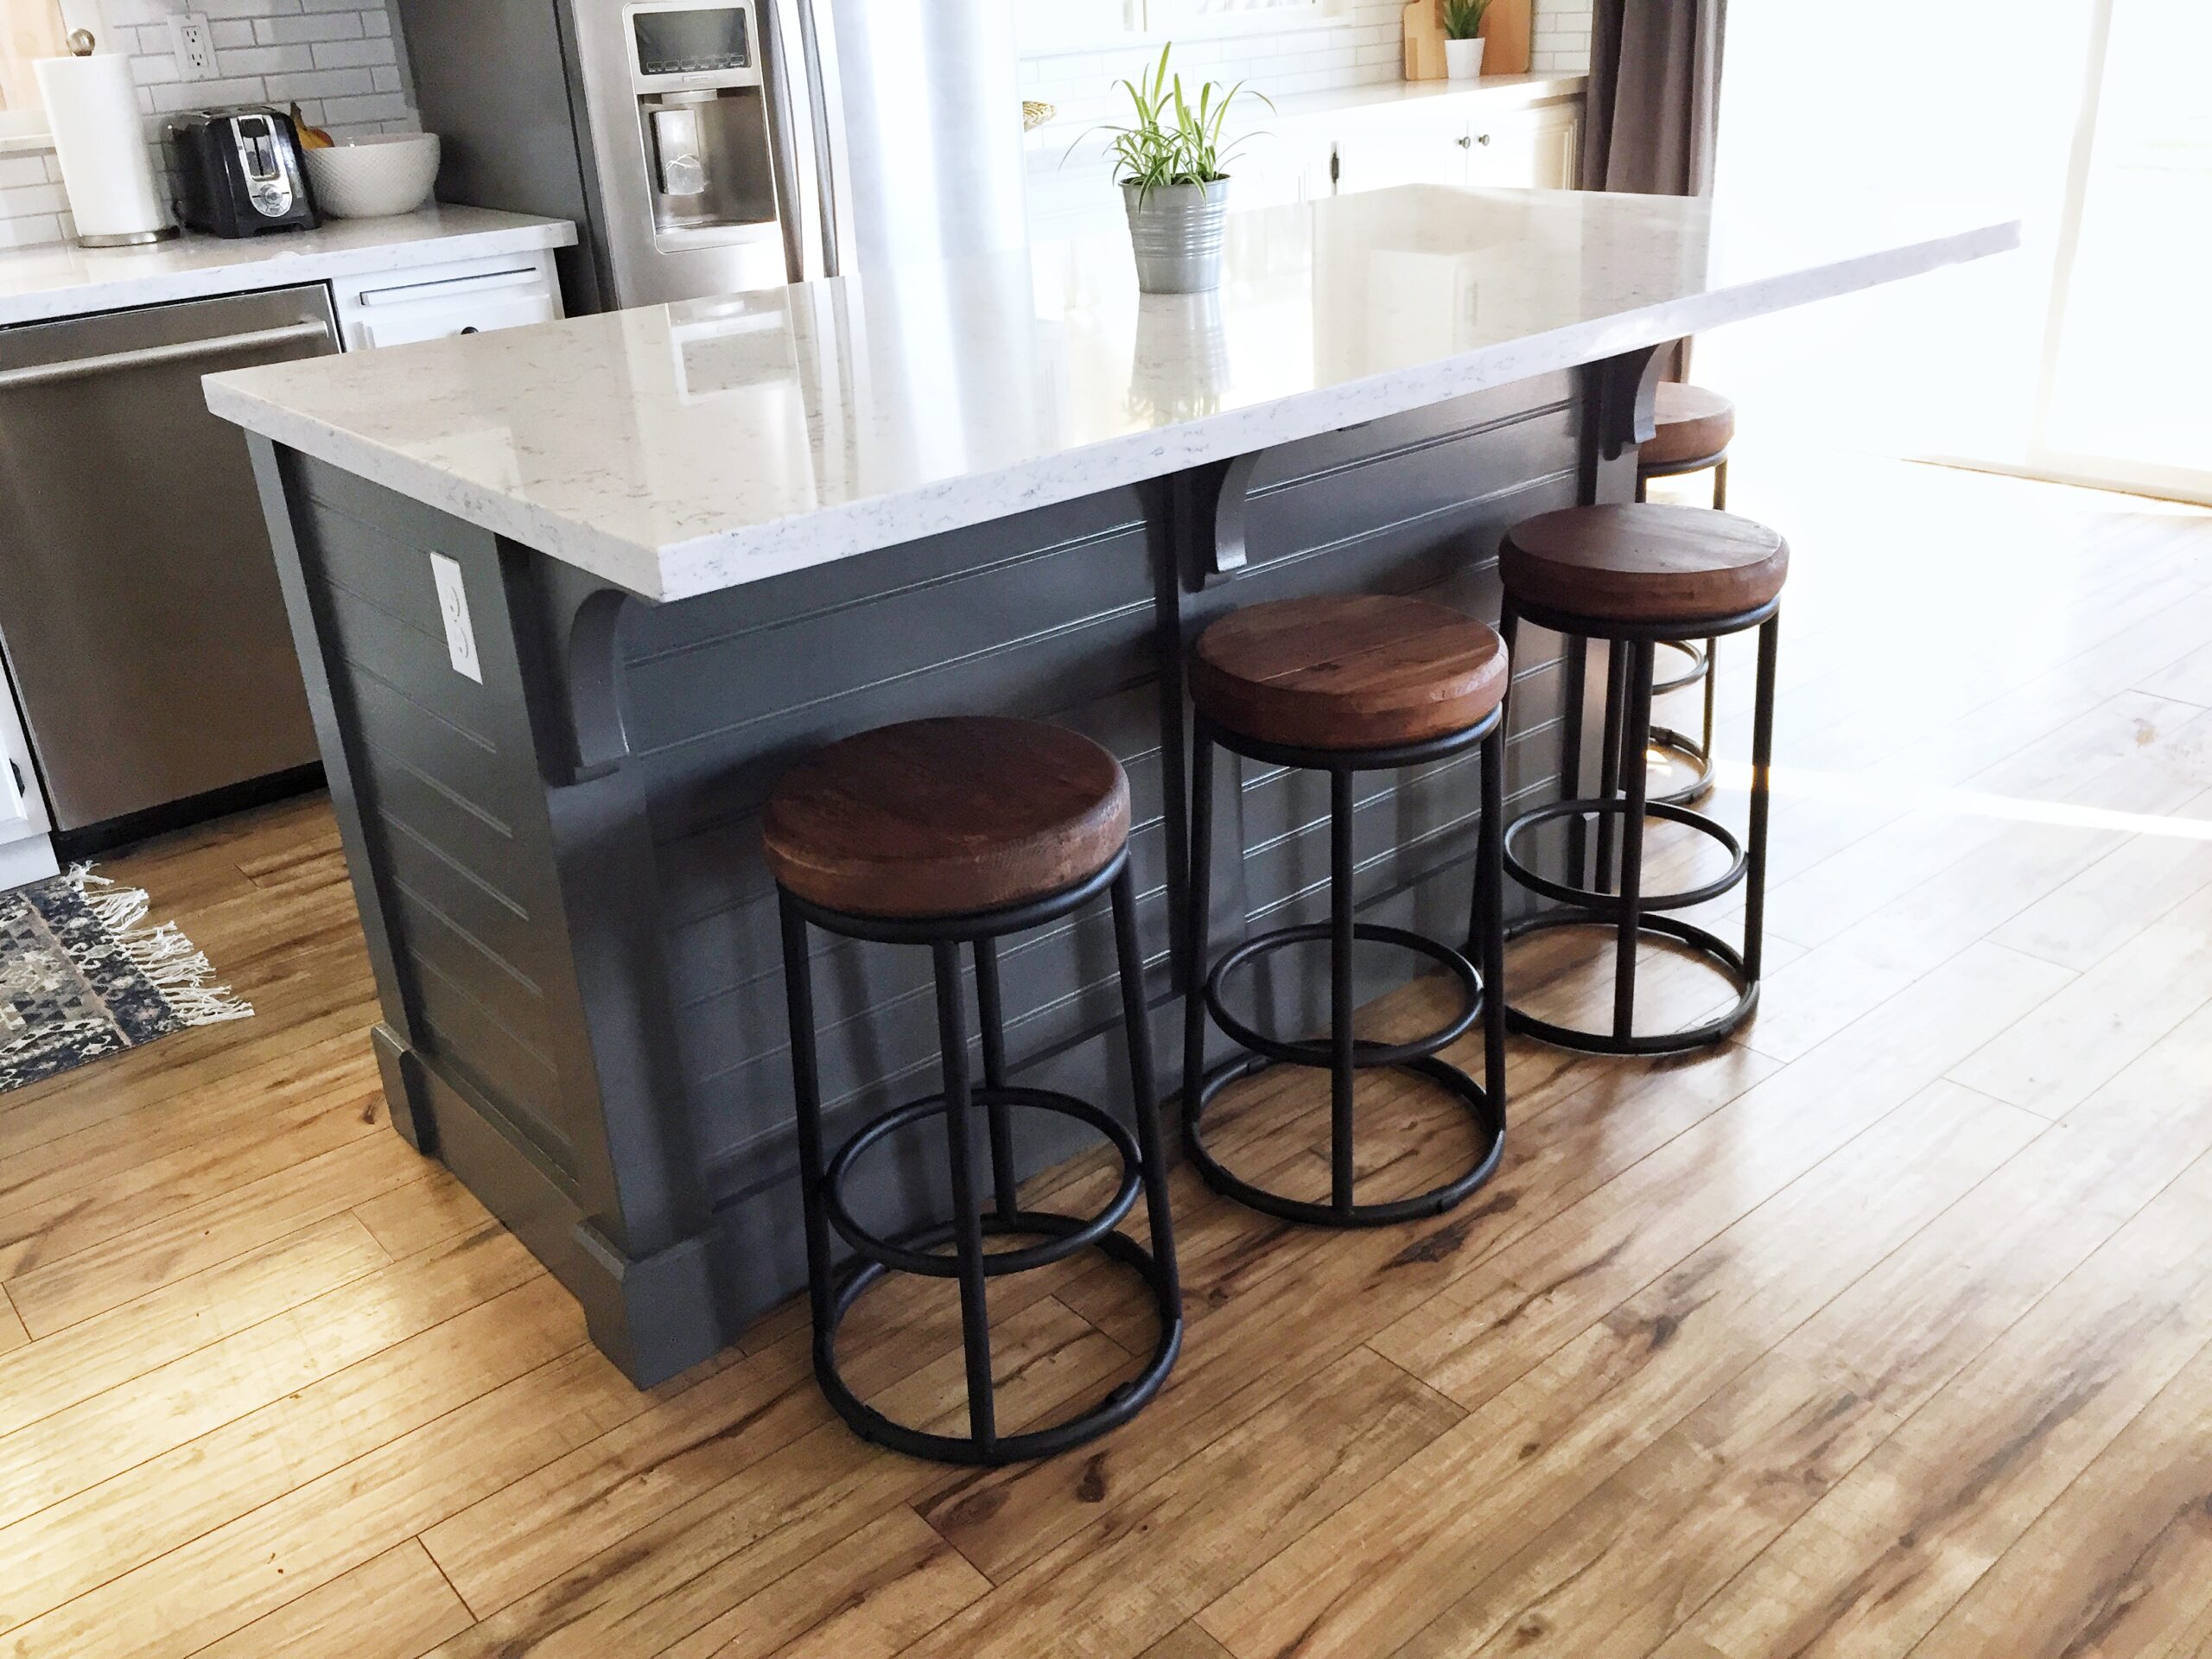 How to Build a Kitchen Island With Stock Cabinets  